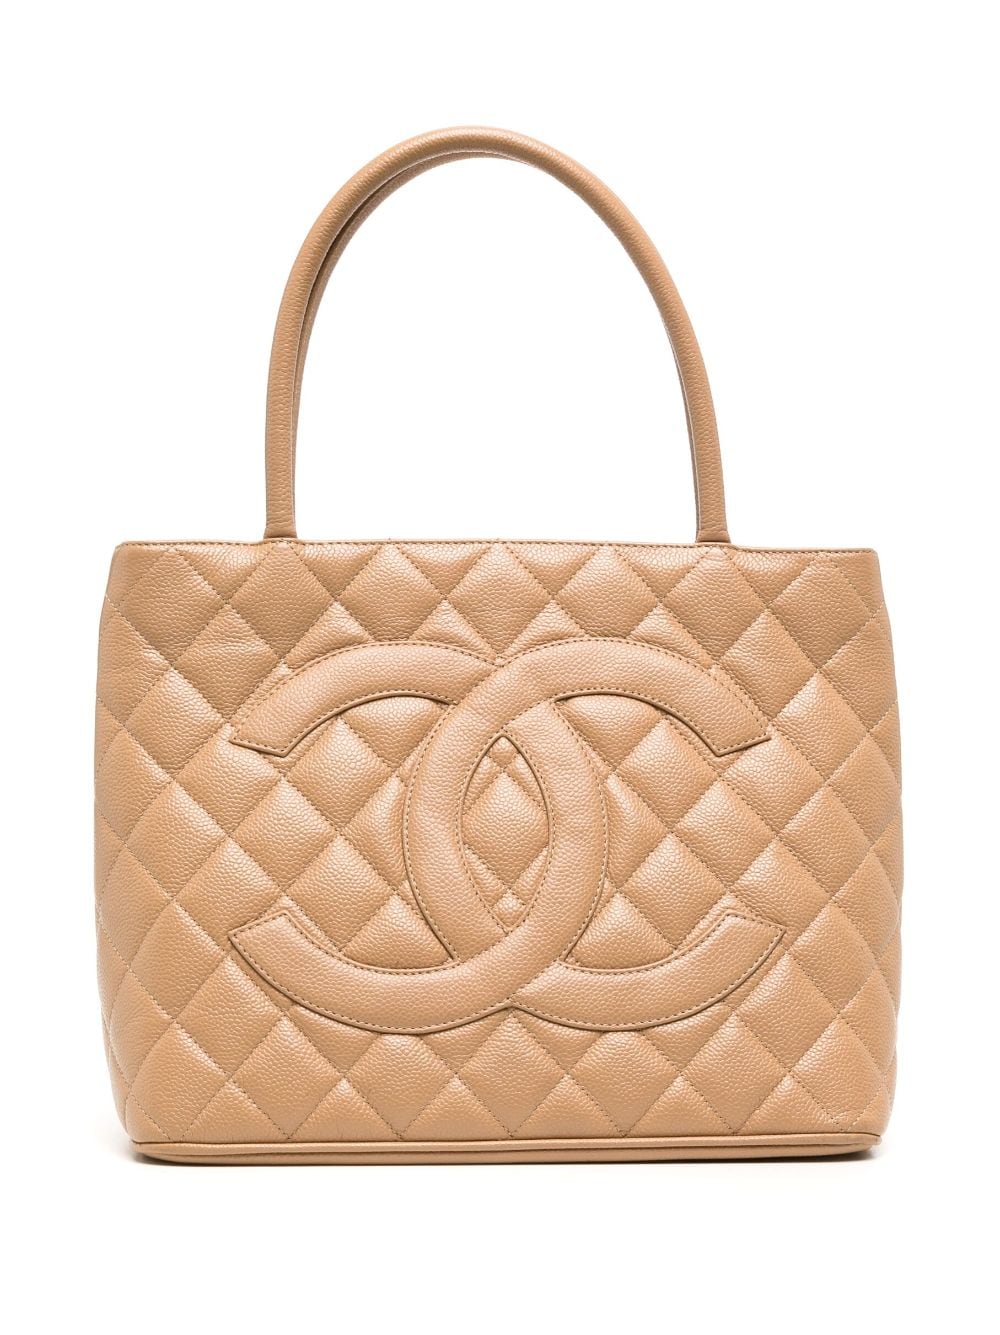 CHANEL Pre-Owned 2000 Medallion Tote Bag - Farfetch